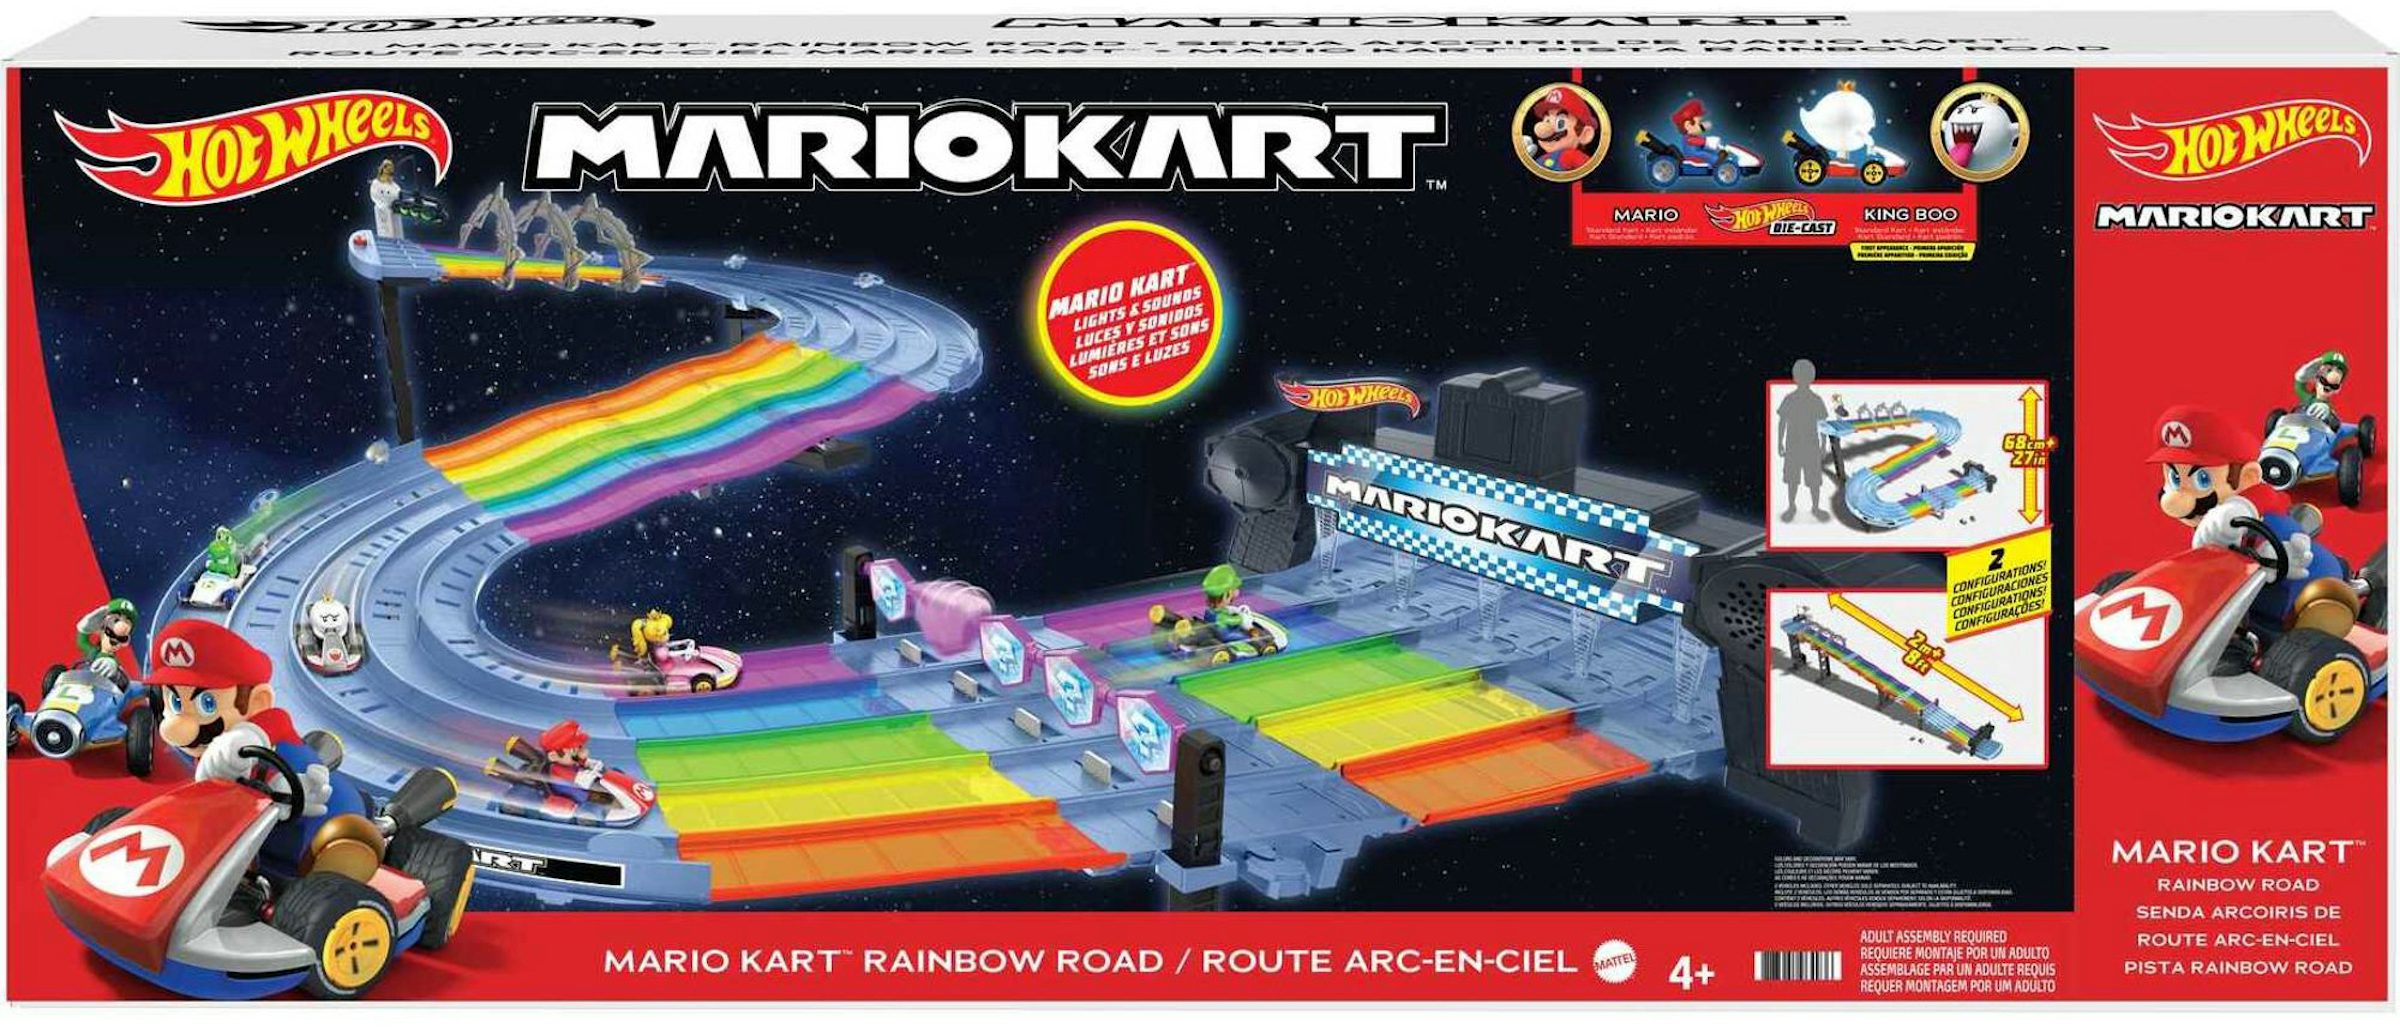 HOT WHEELS MARIO KART - THE TOY STORE